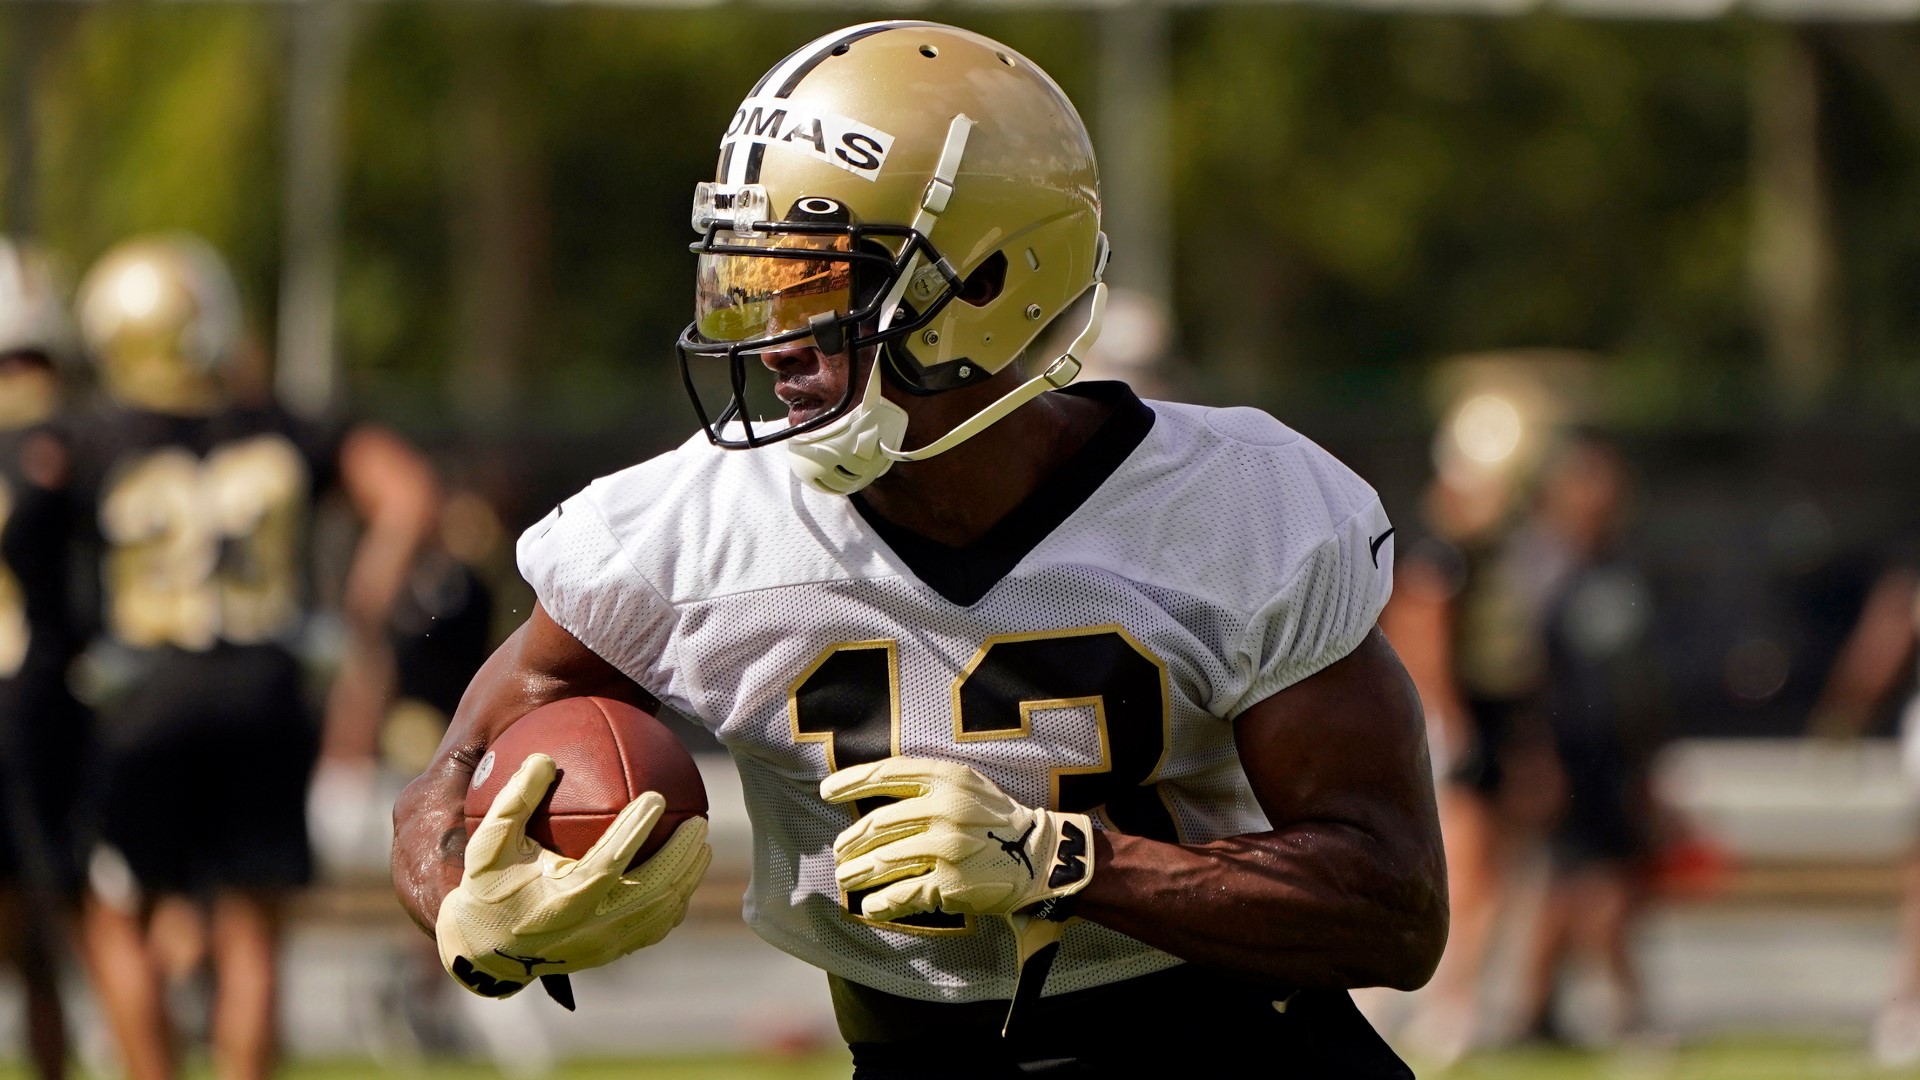 Saints Camp Day 1: Michael Thomas, Jimmy Graham, and Taysom Hill contribute to passing attack